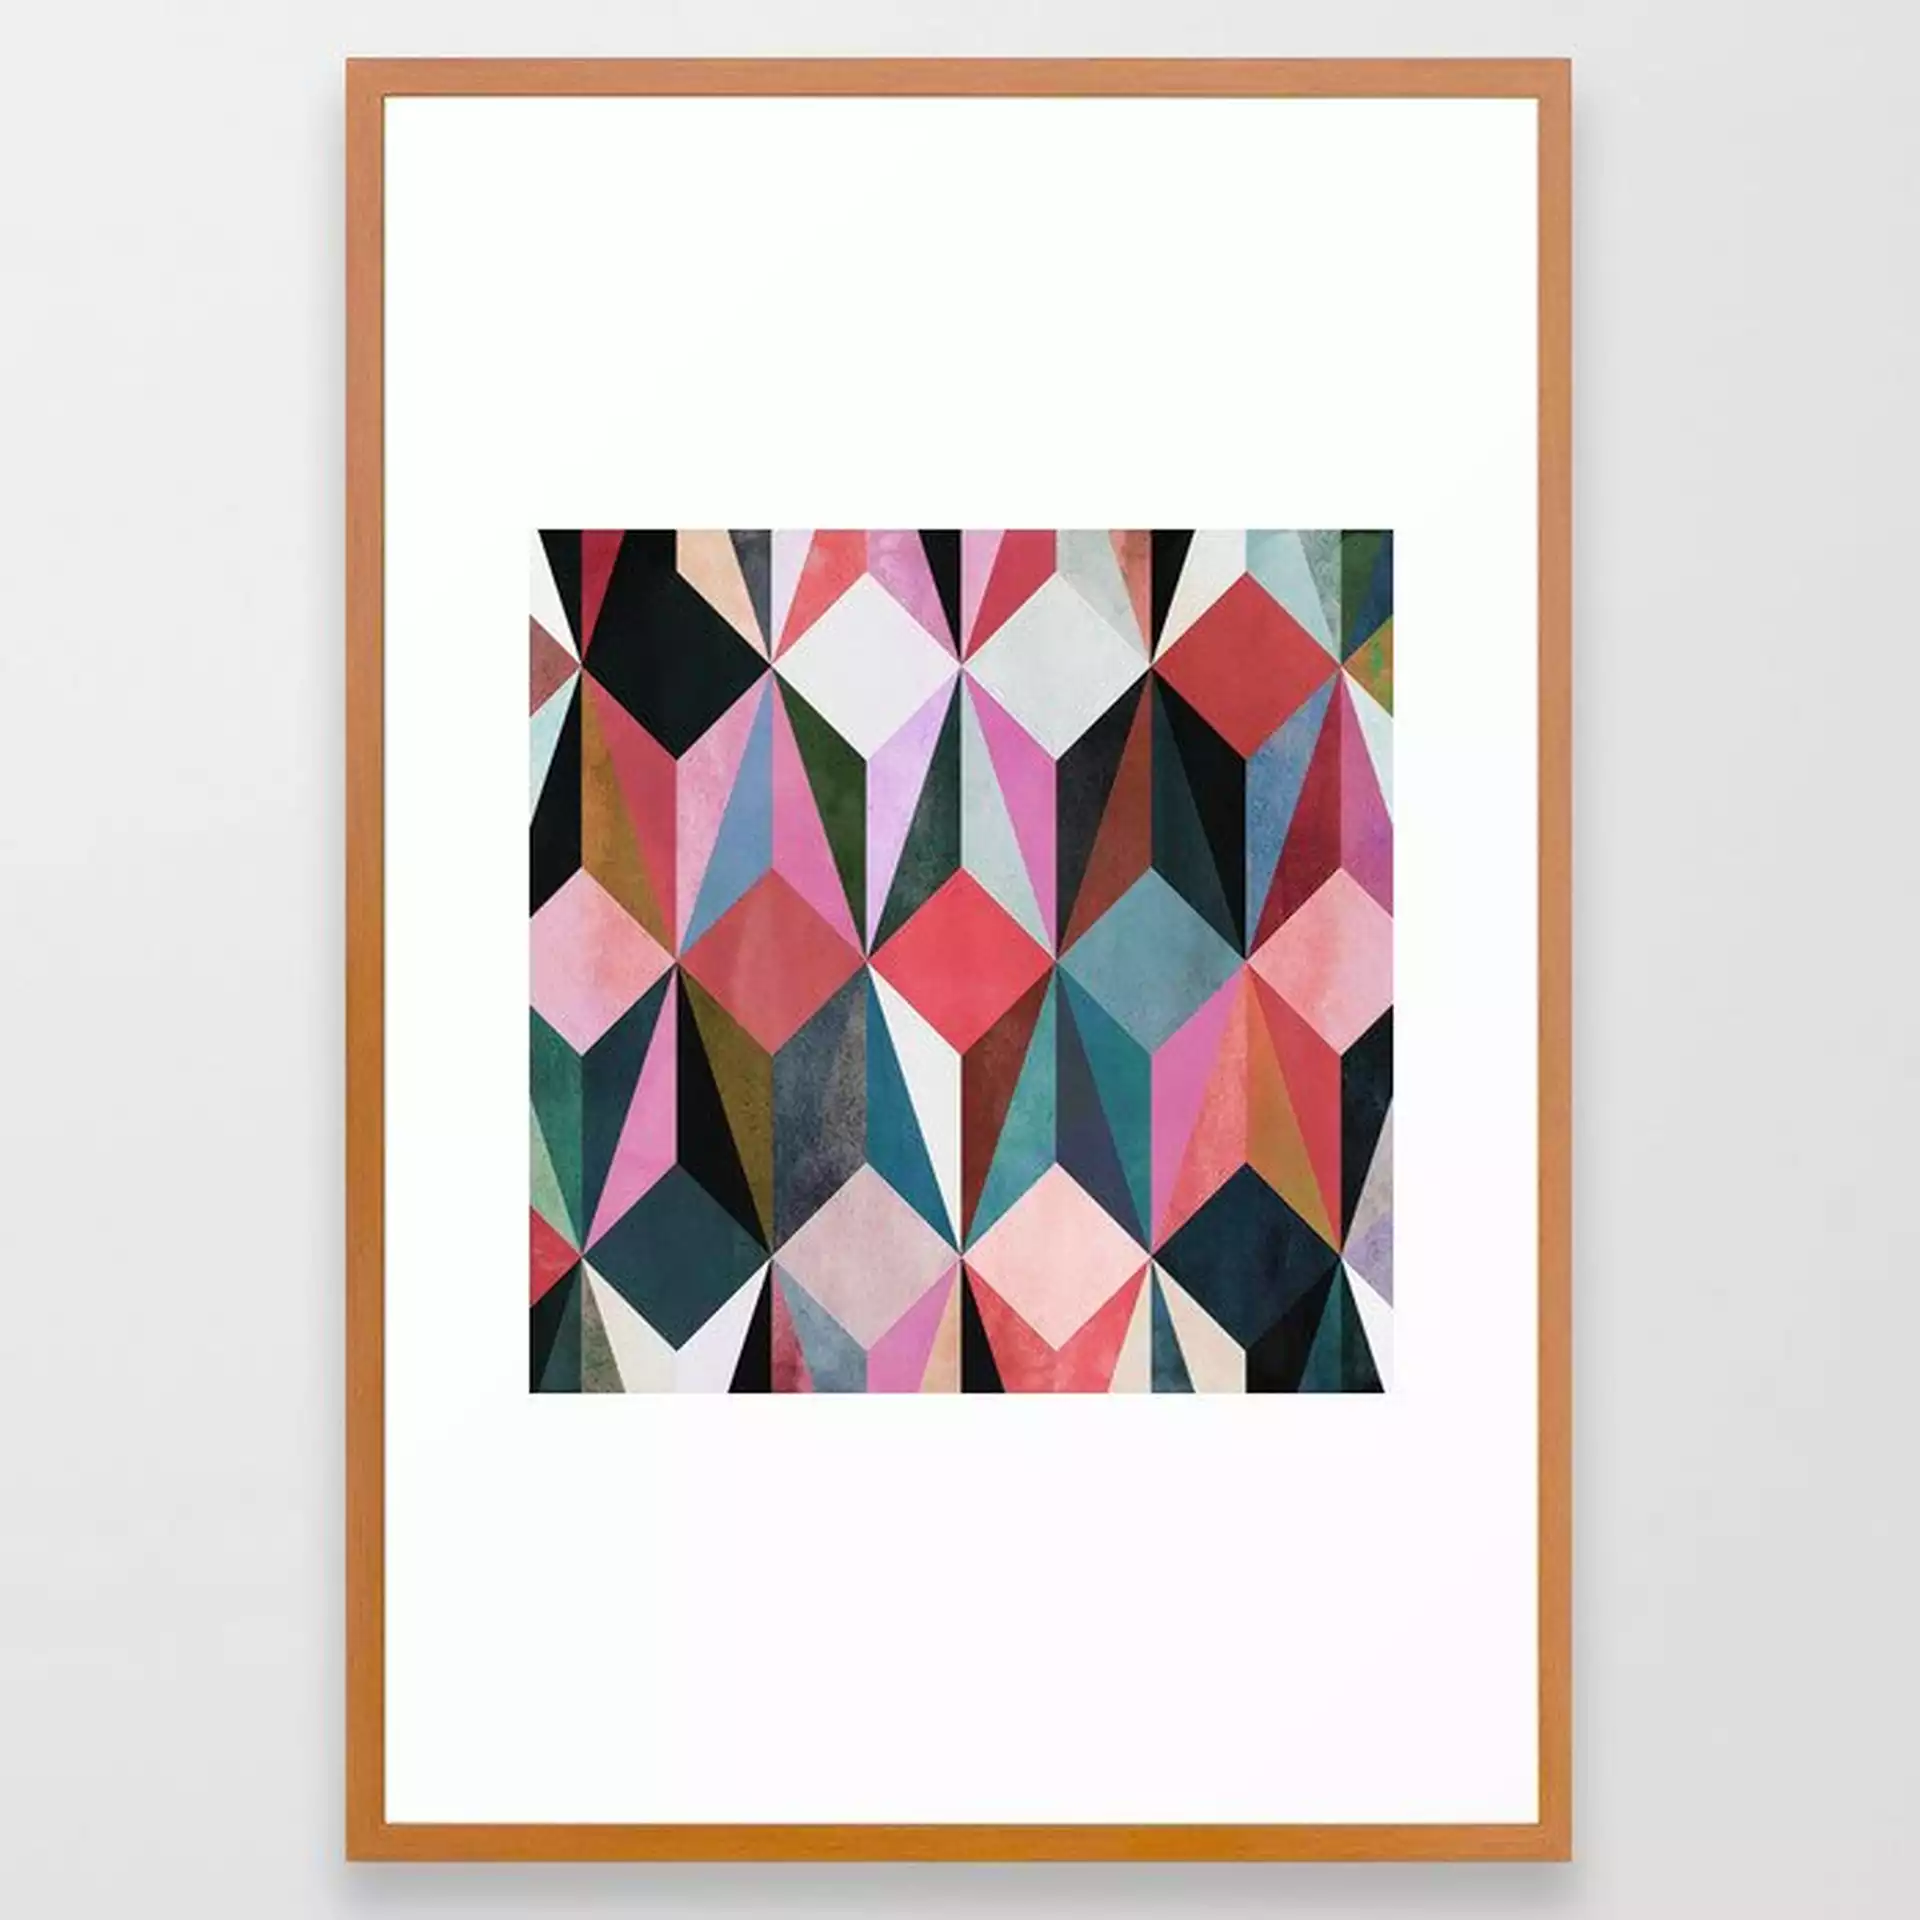 Colour + Pattern 21 Framed Art Print by Georgiana Paraschiv - Conservation Pecan - LARGE (Gallery)-26x38